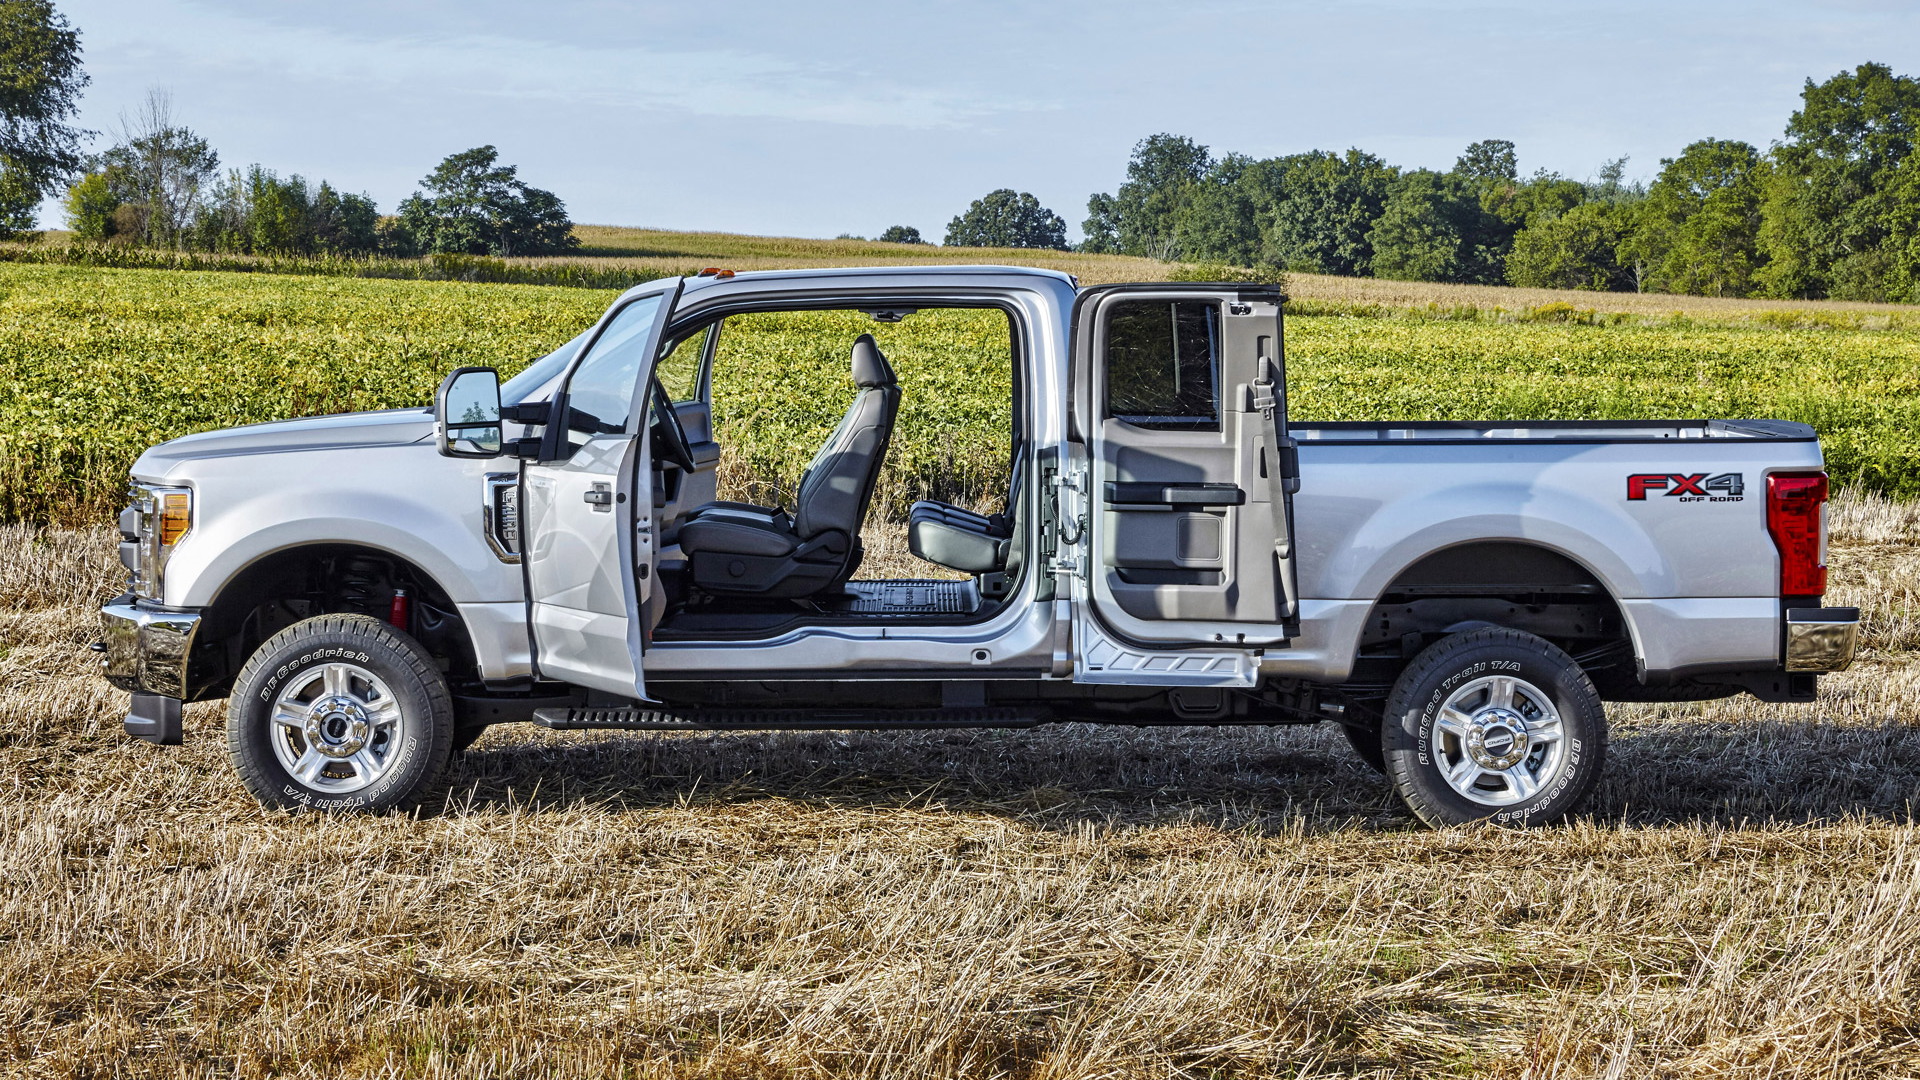 Aluminum-Bodied 2017 Ford F-Series Super Duty Rolls In